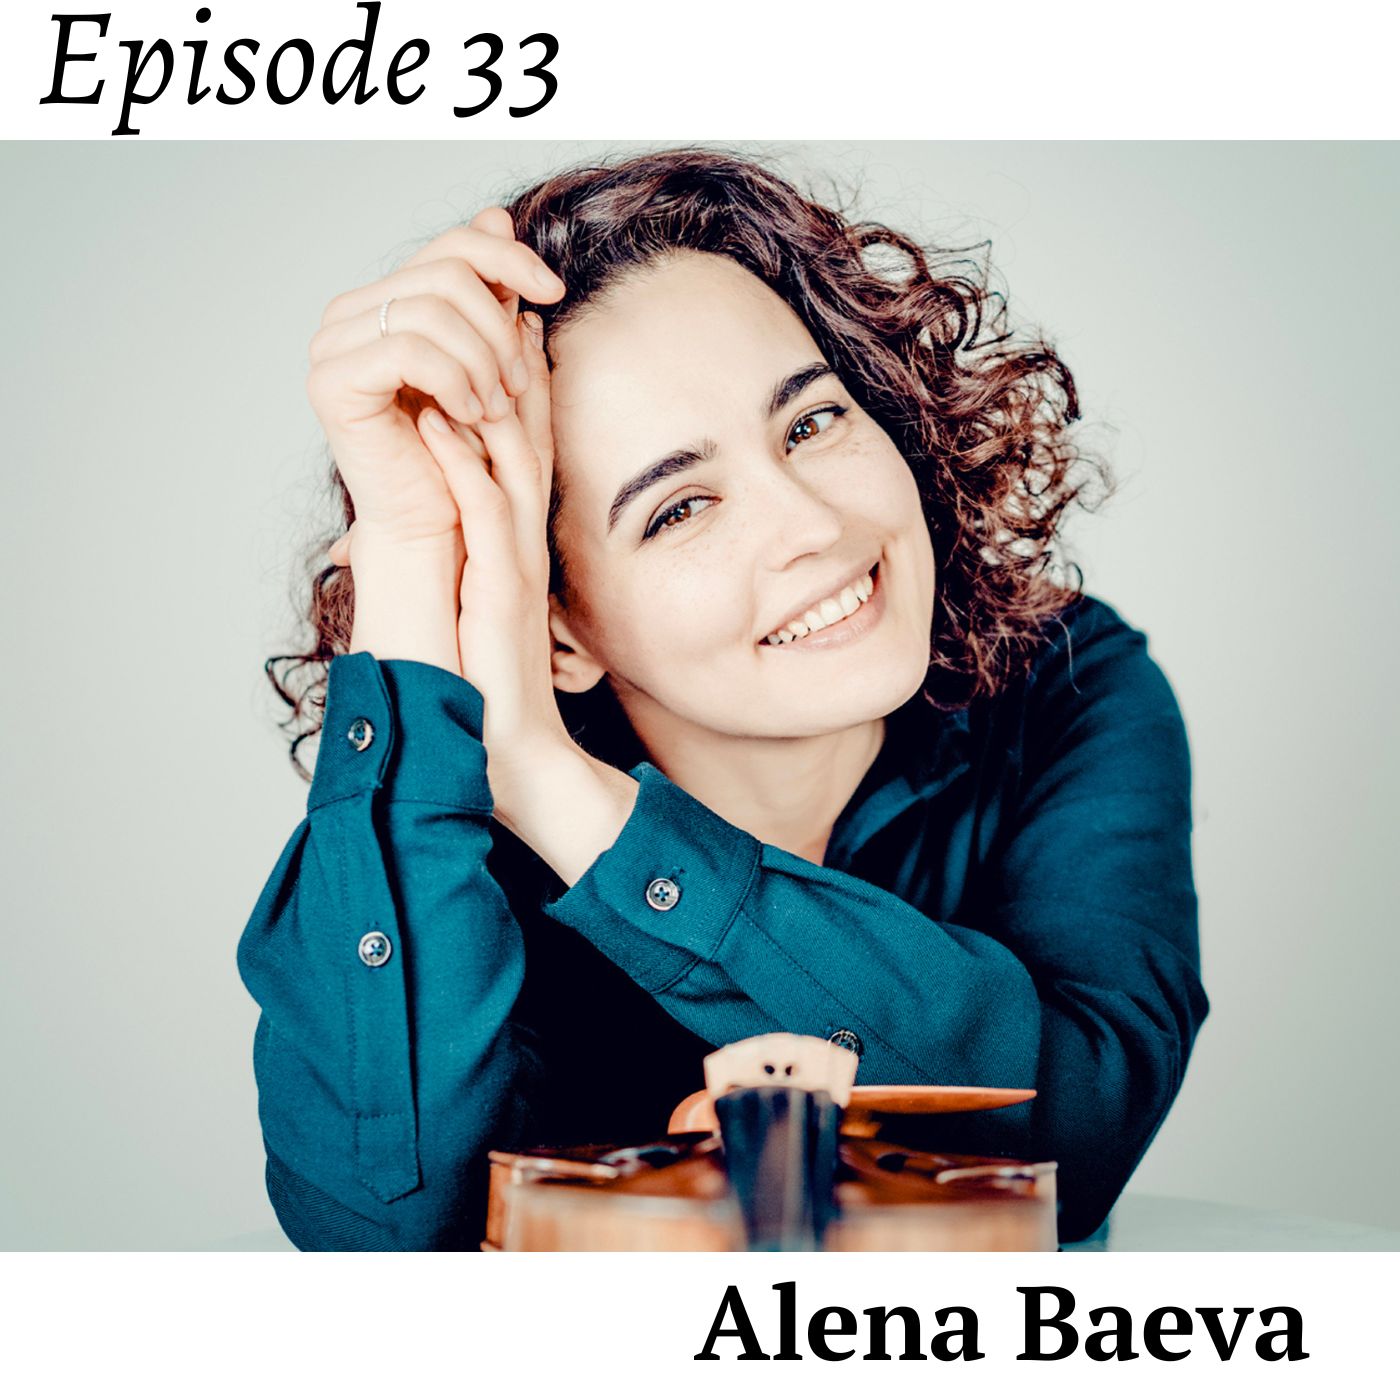 Episode 33: Alena Baeva - Where to get an inspiration? How to learn piece faster?